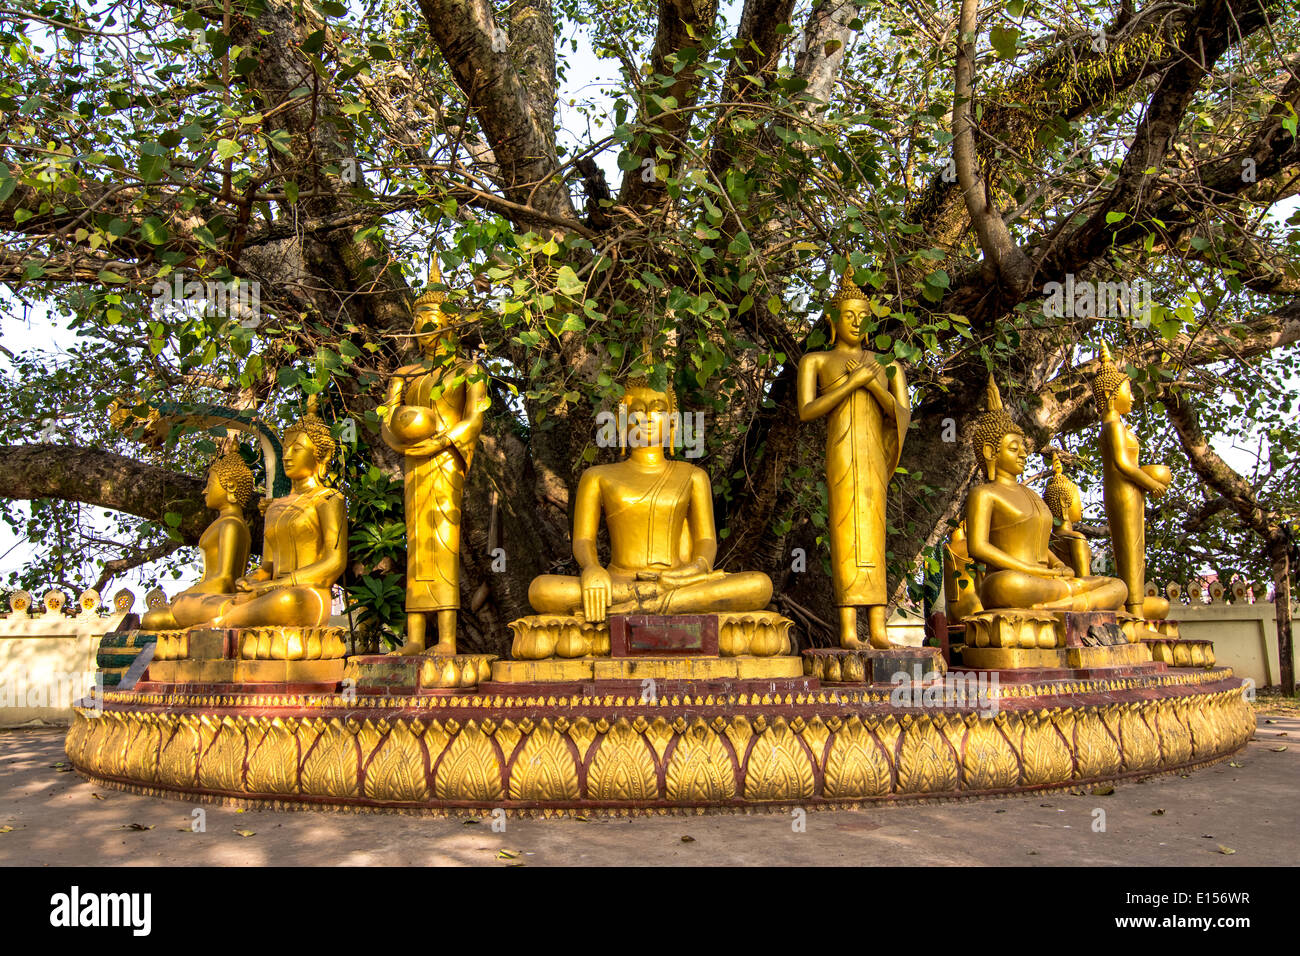 Buddha sculptures at Pha That Luang in Vientiane, Laos. Stock Photo